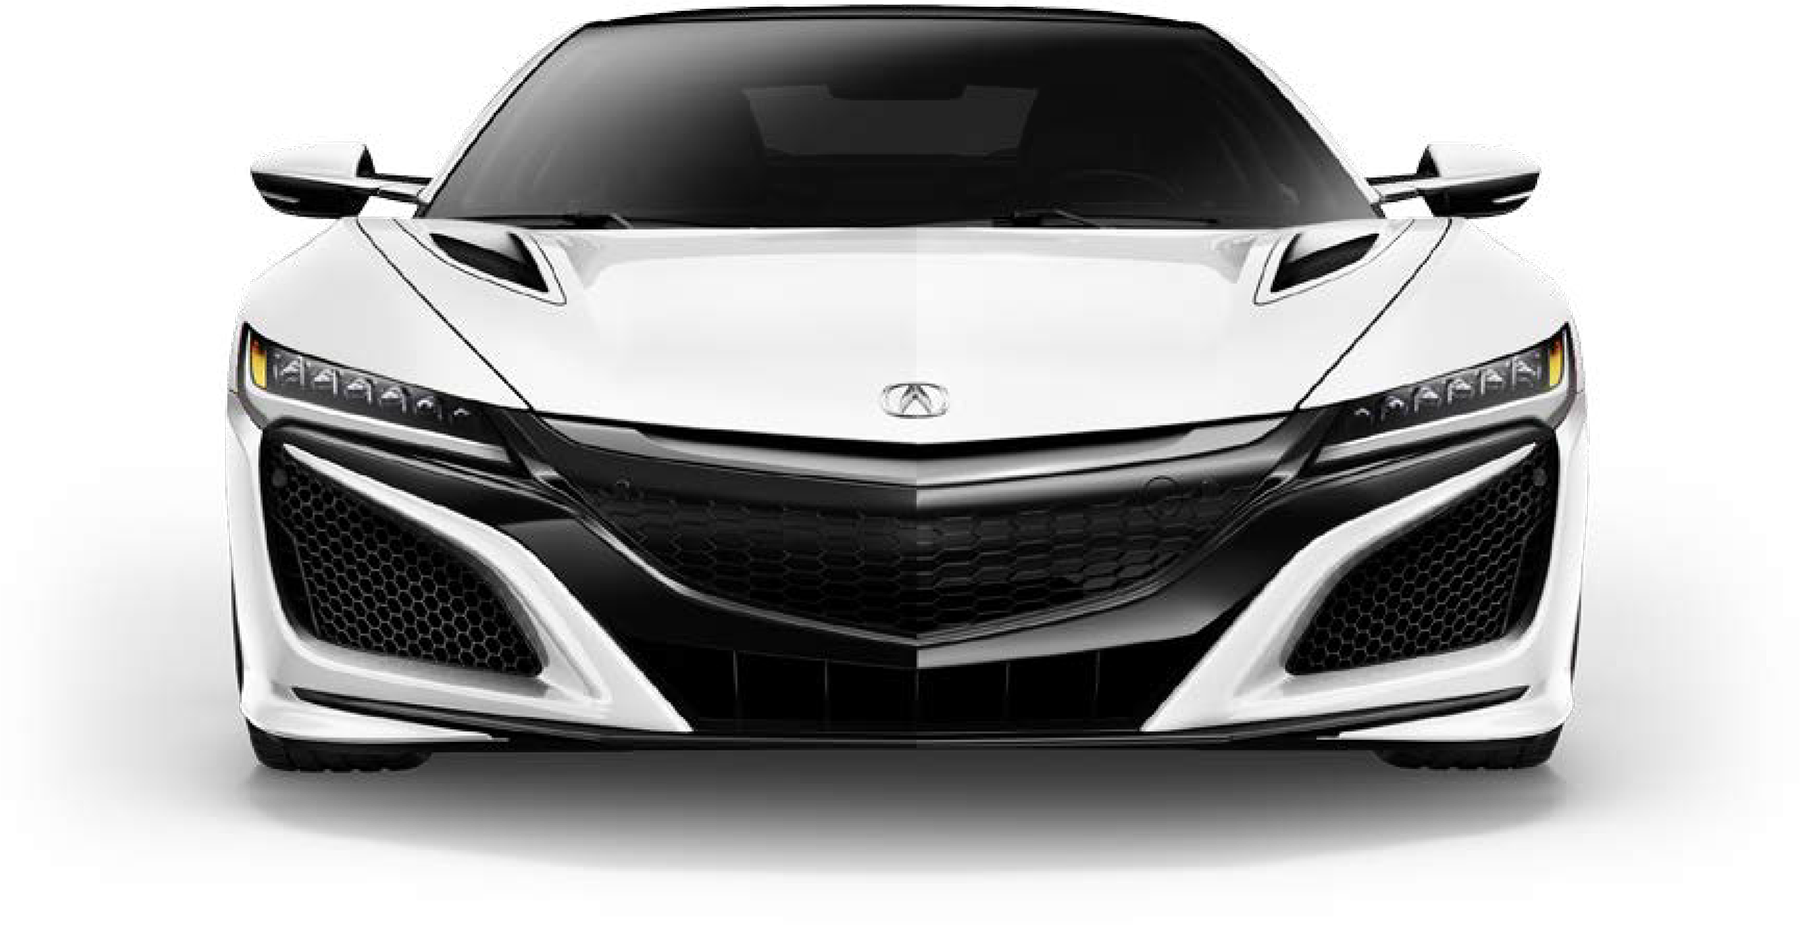 Nsx Acura HD Image Free PNG Image